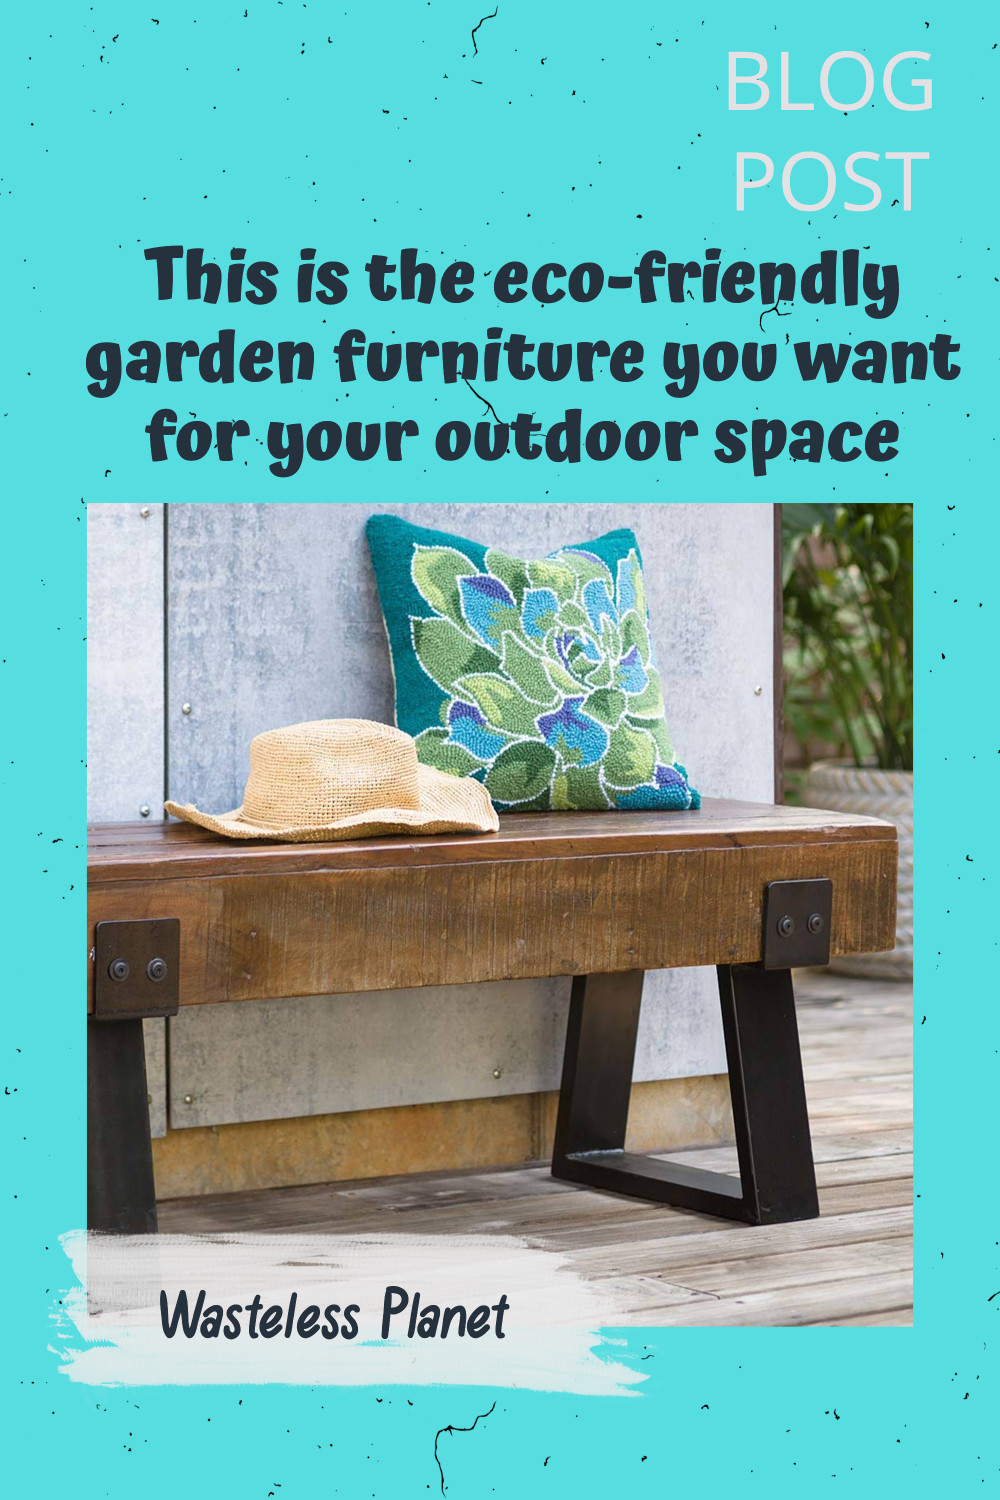 This is the eco-friendly garden furniture you want for your outdoor space